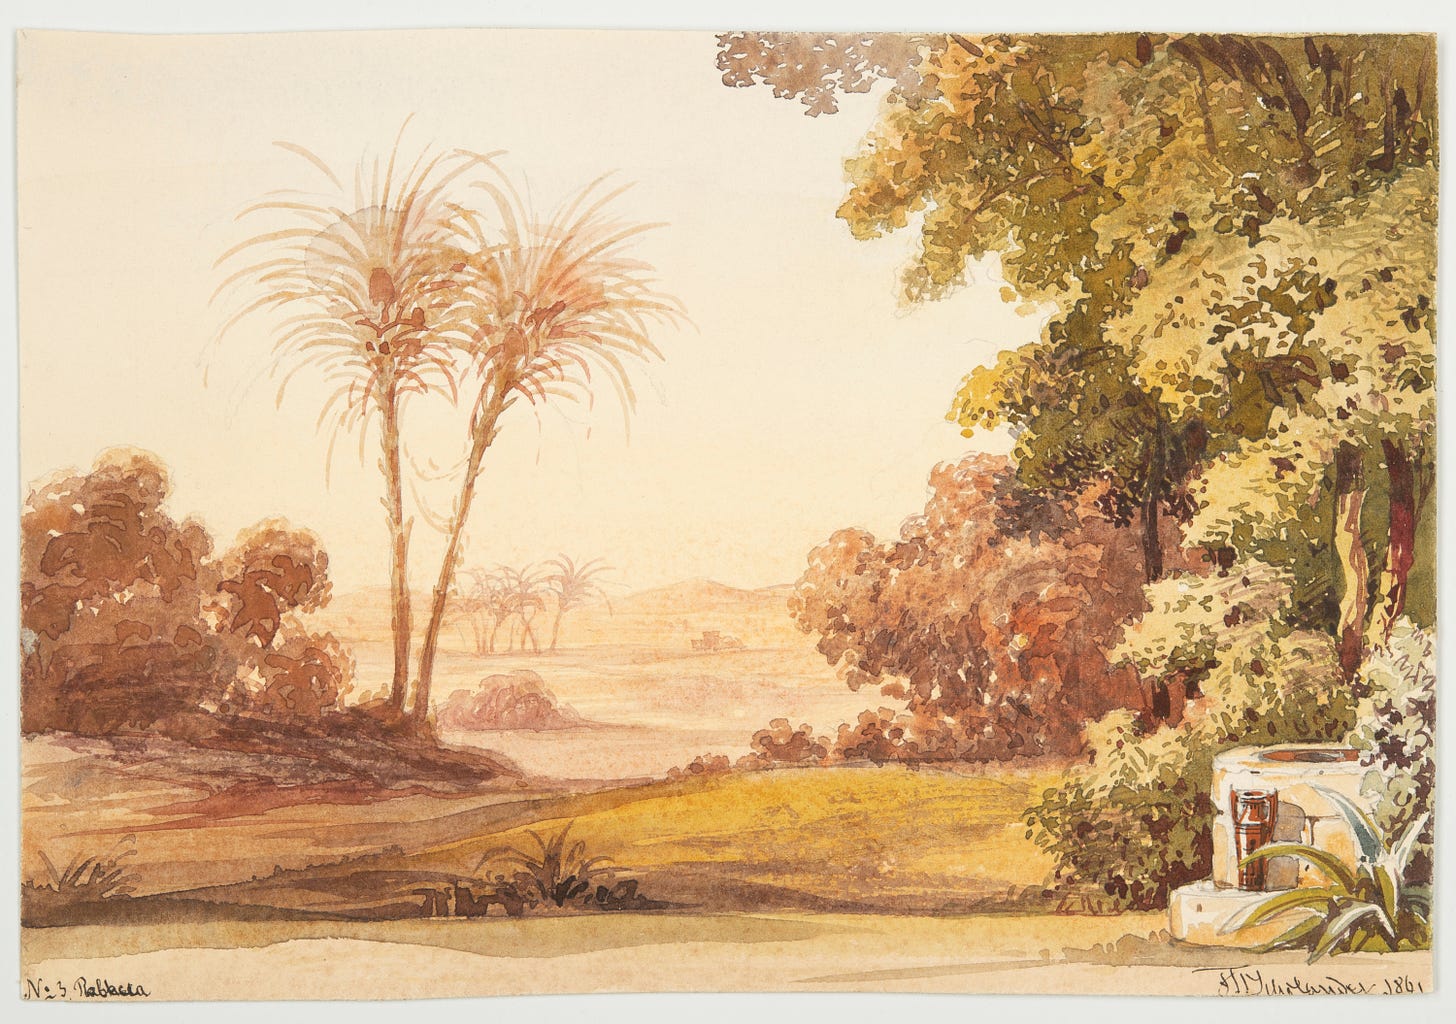 Lanscape showing palm trees and a well.